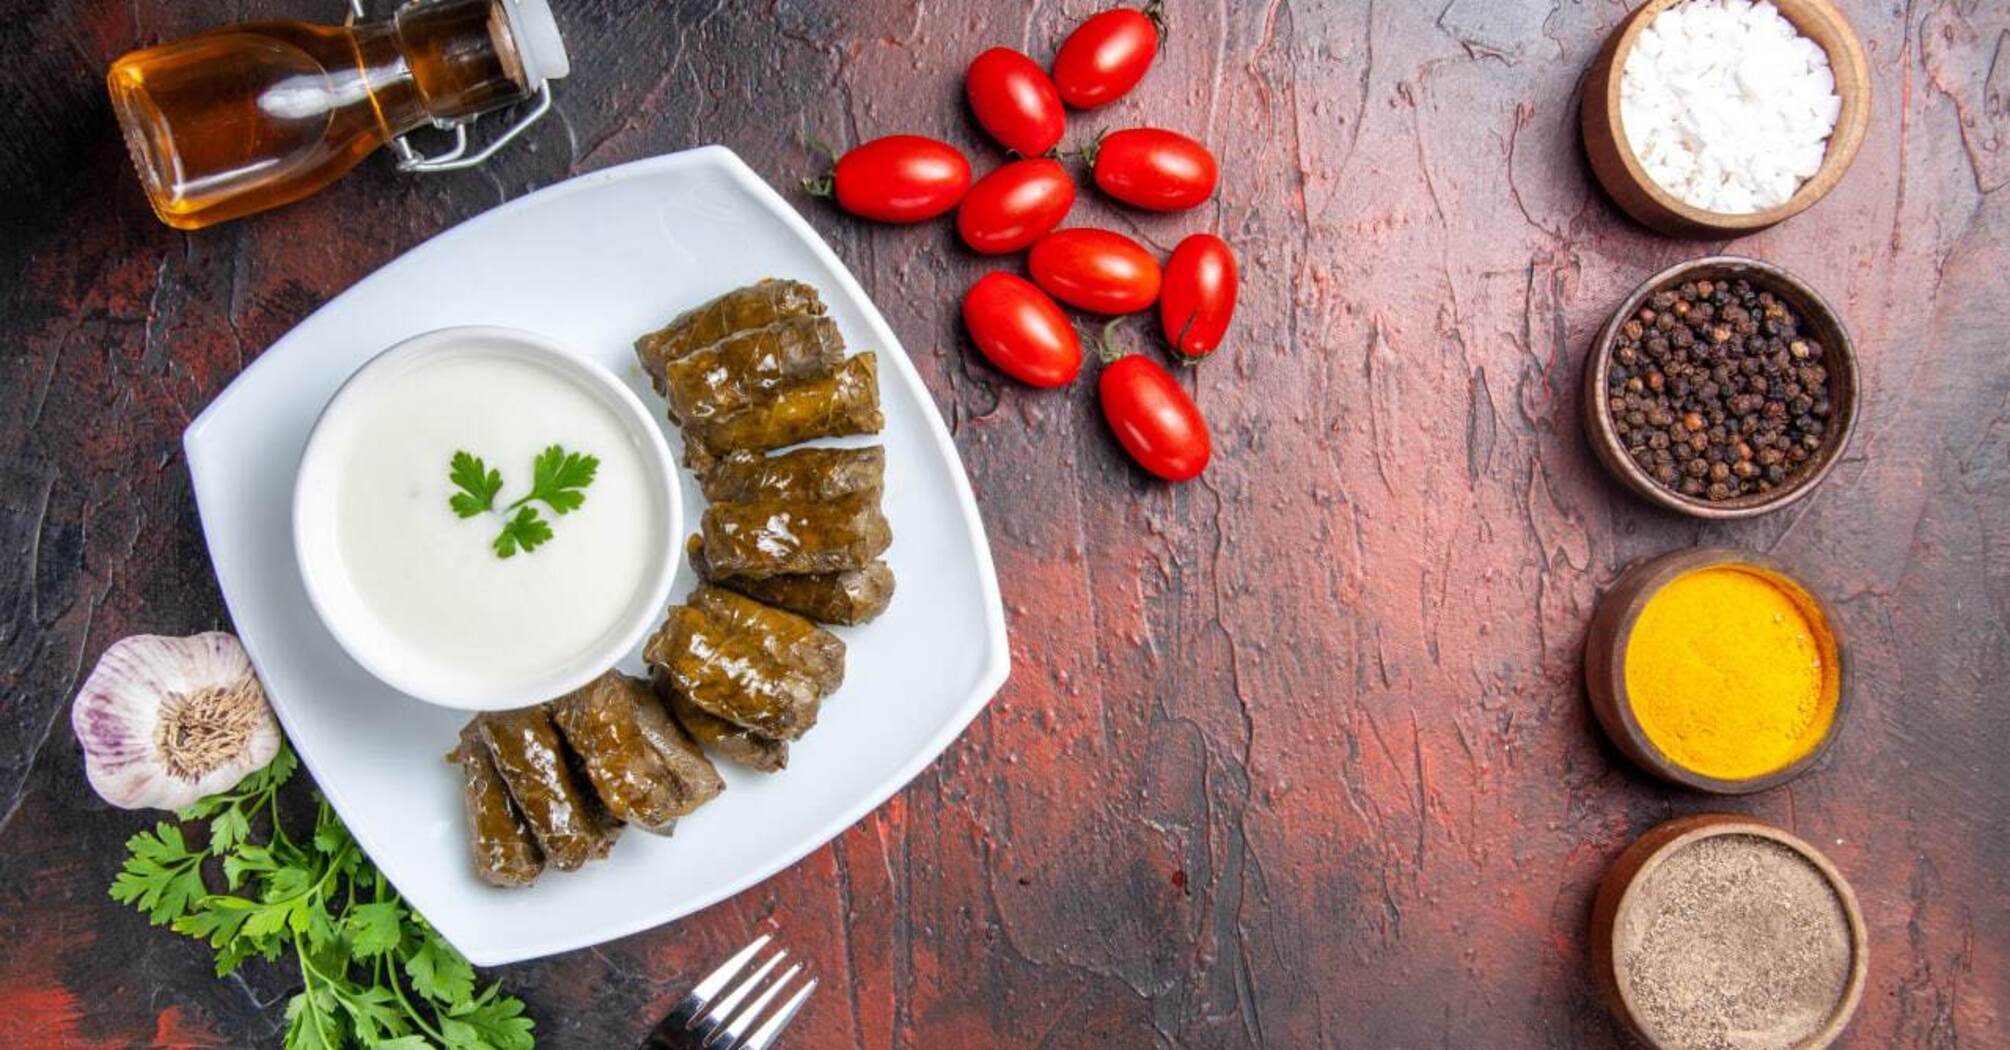 You should try vegetarian dishes in Armenia